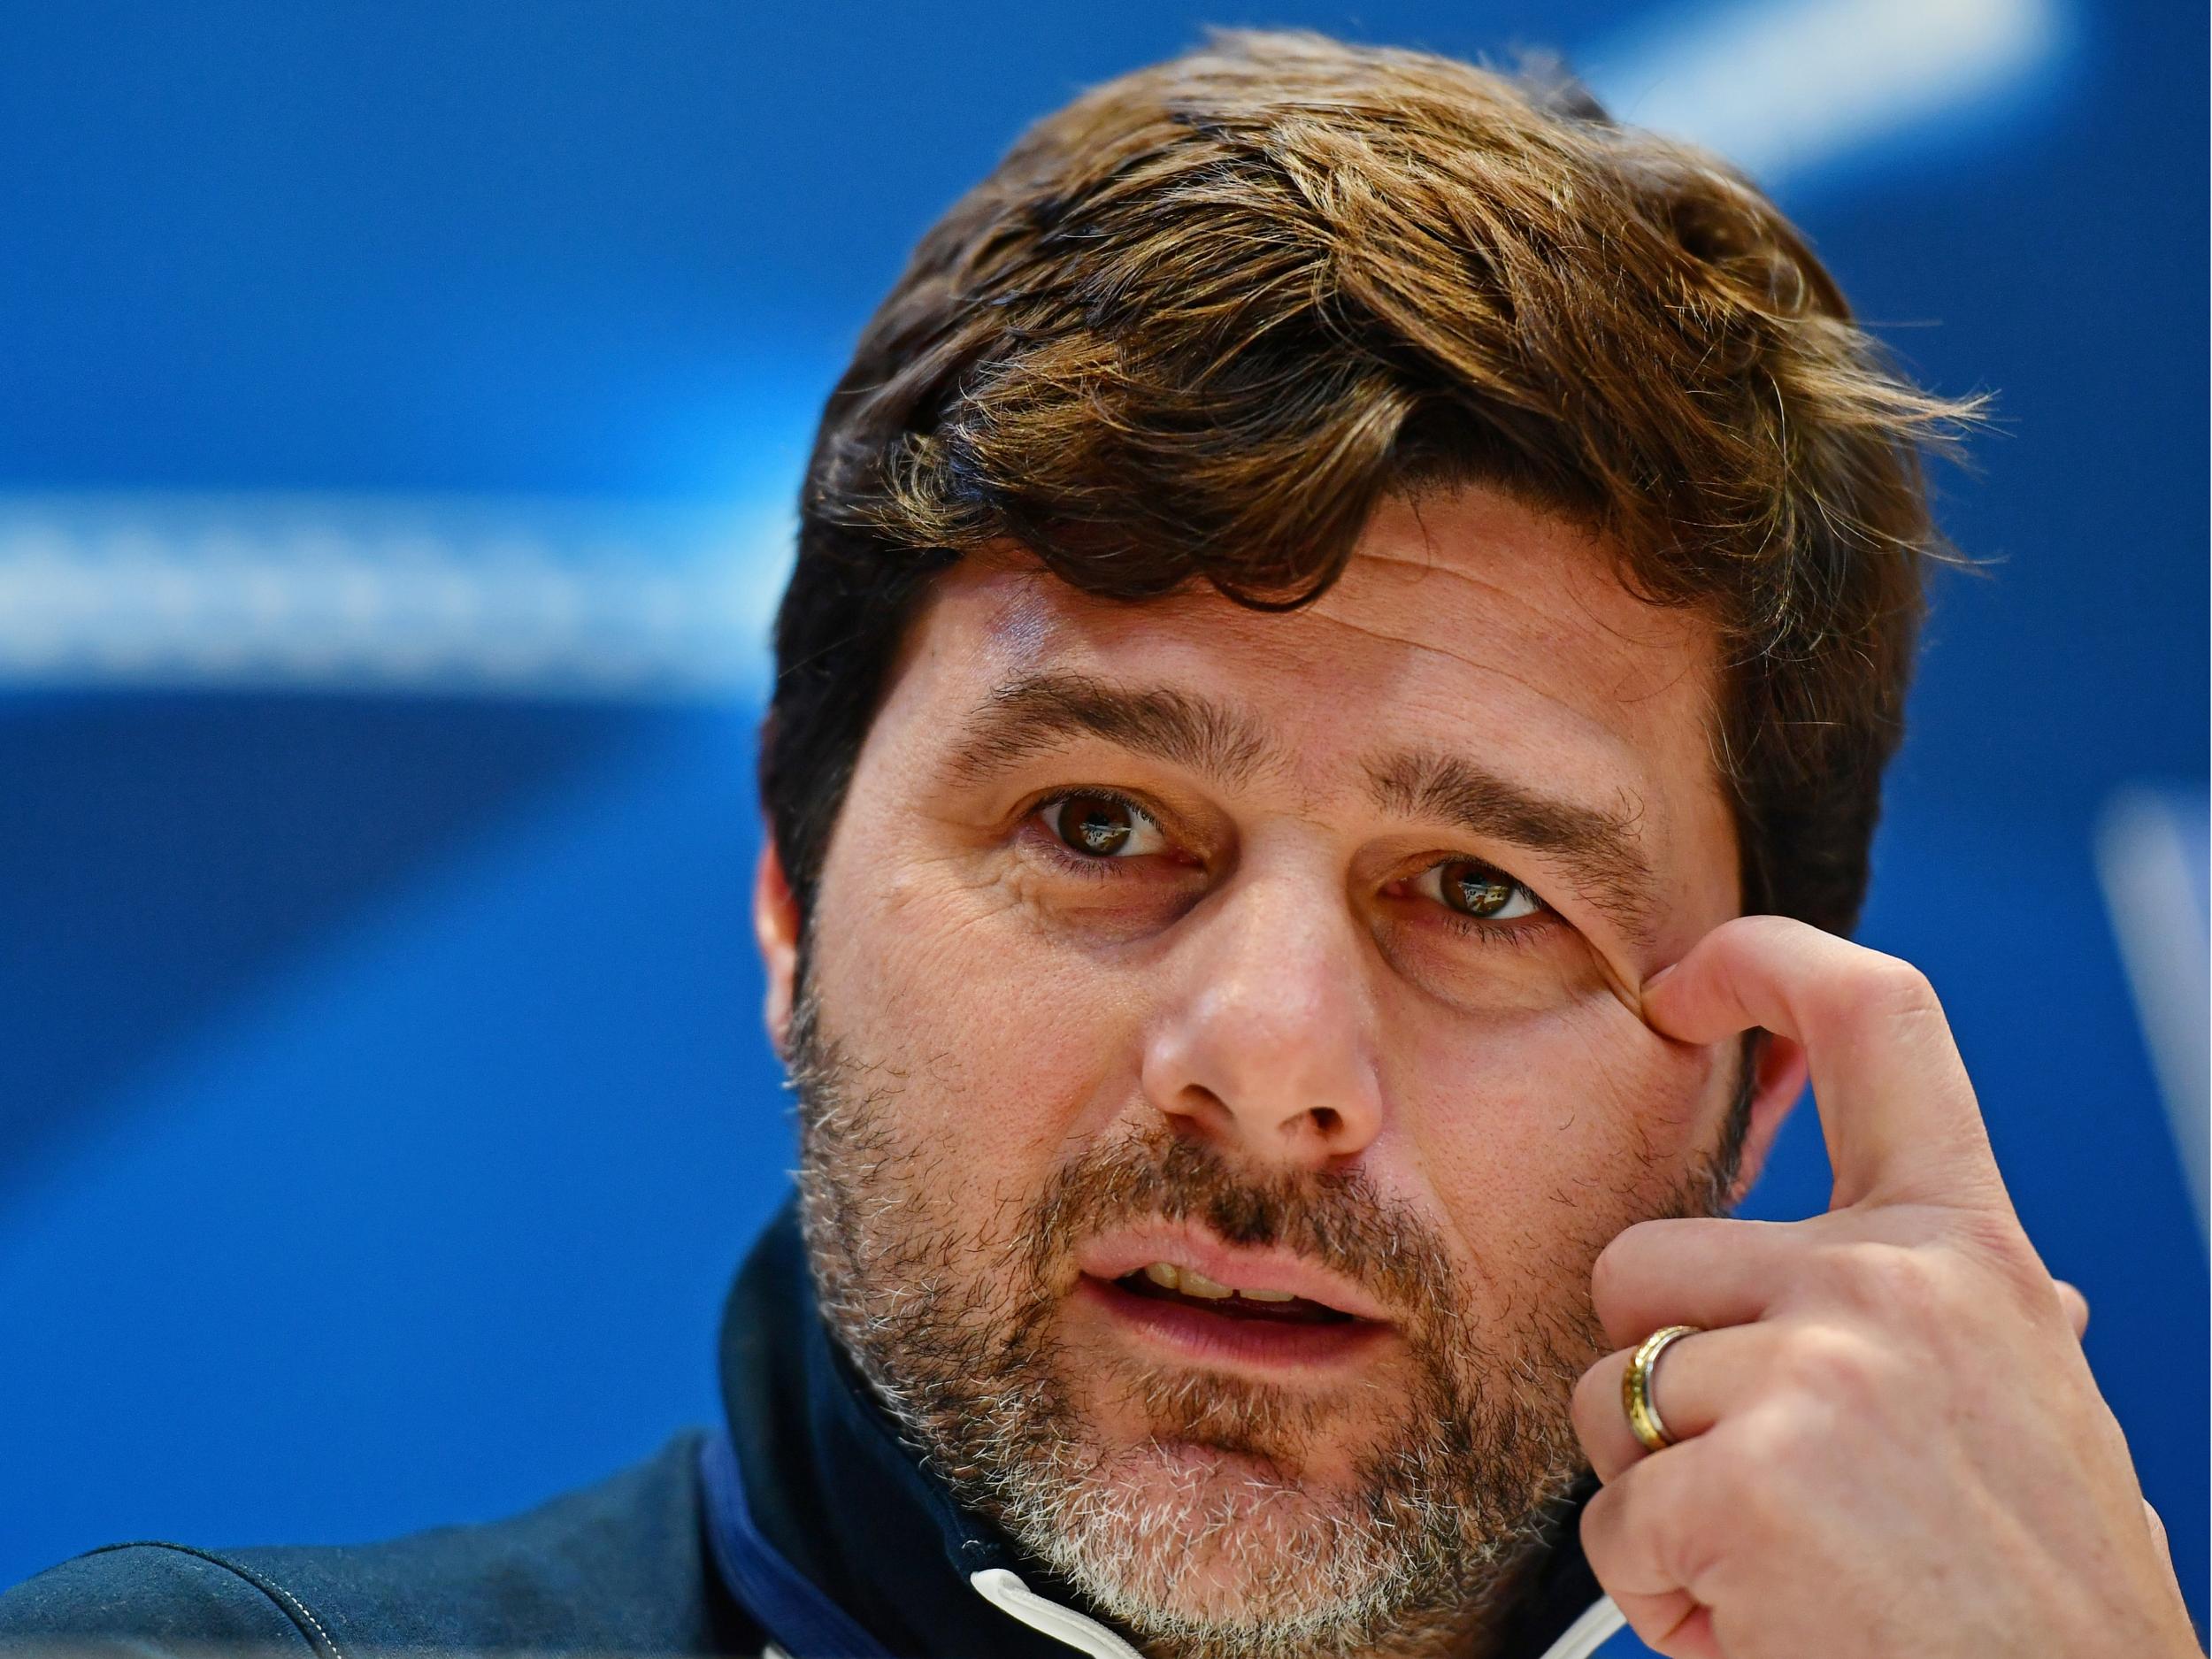 Pochettino's Tottenham qualified for the Champions League as last year's Premier League runners-up